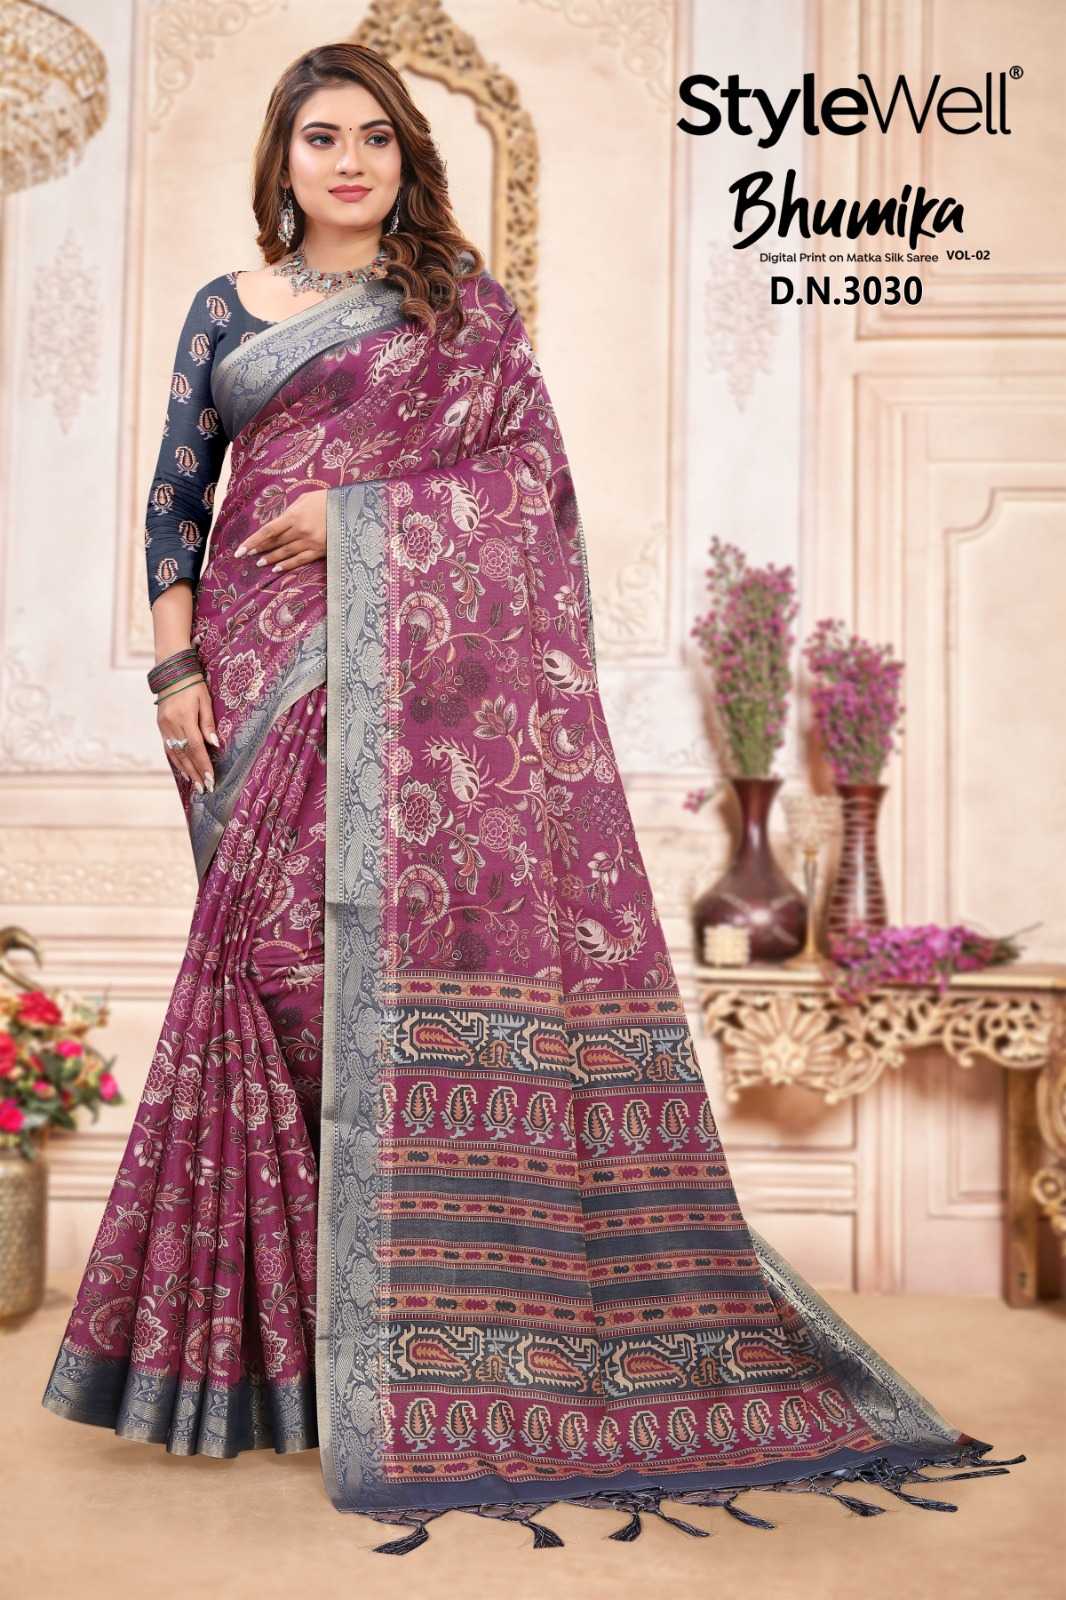 BHUMIKA VOL 2 BY STYLEWELL REGULAR WEAR TRADITIONAL SAREE